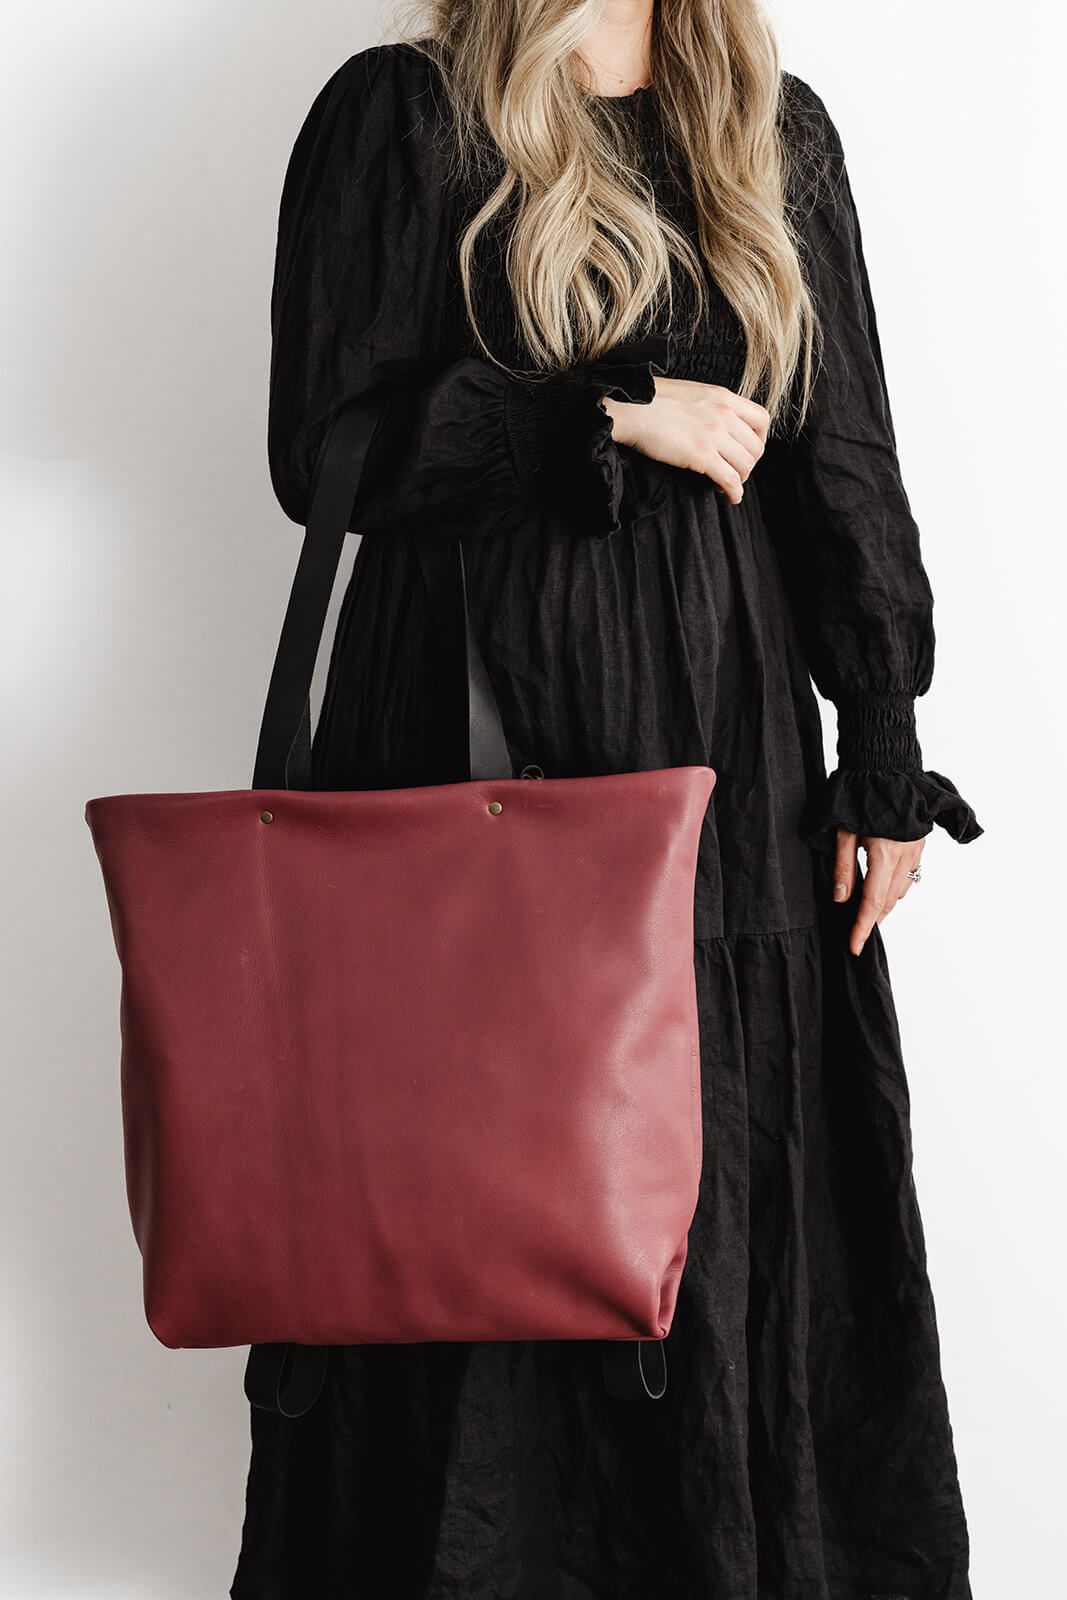 Product pic the Ella Jackson Cherry Leather Backpack & Tote. The bag is being worn as a tote on the elbow of a woman in a long black dress in front of a white background